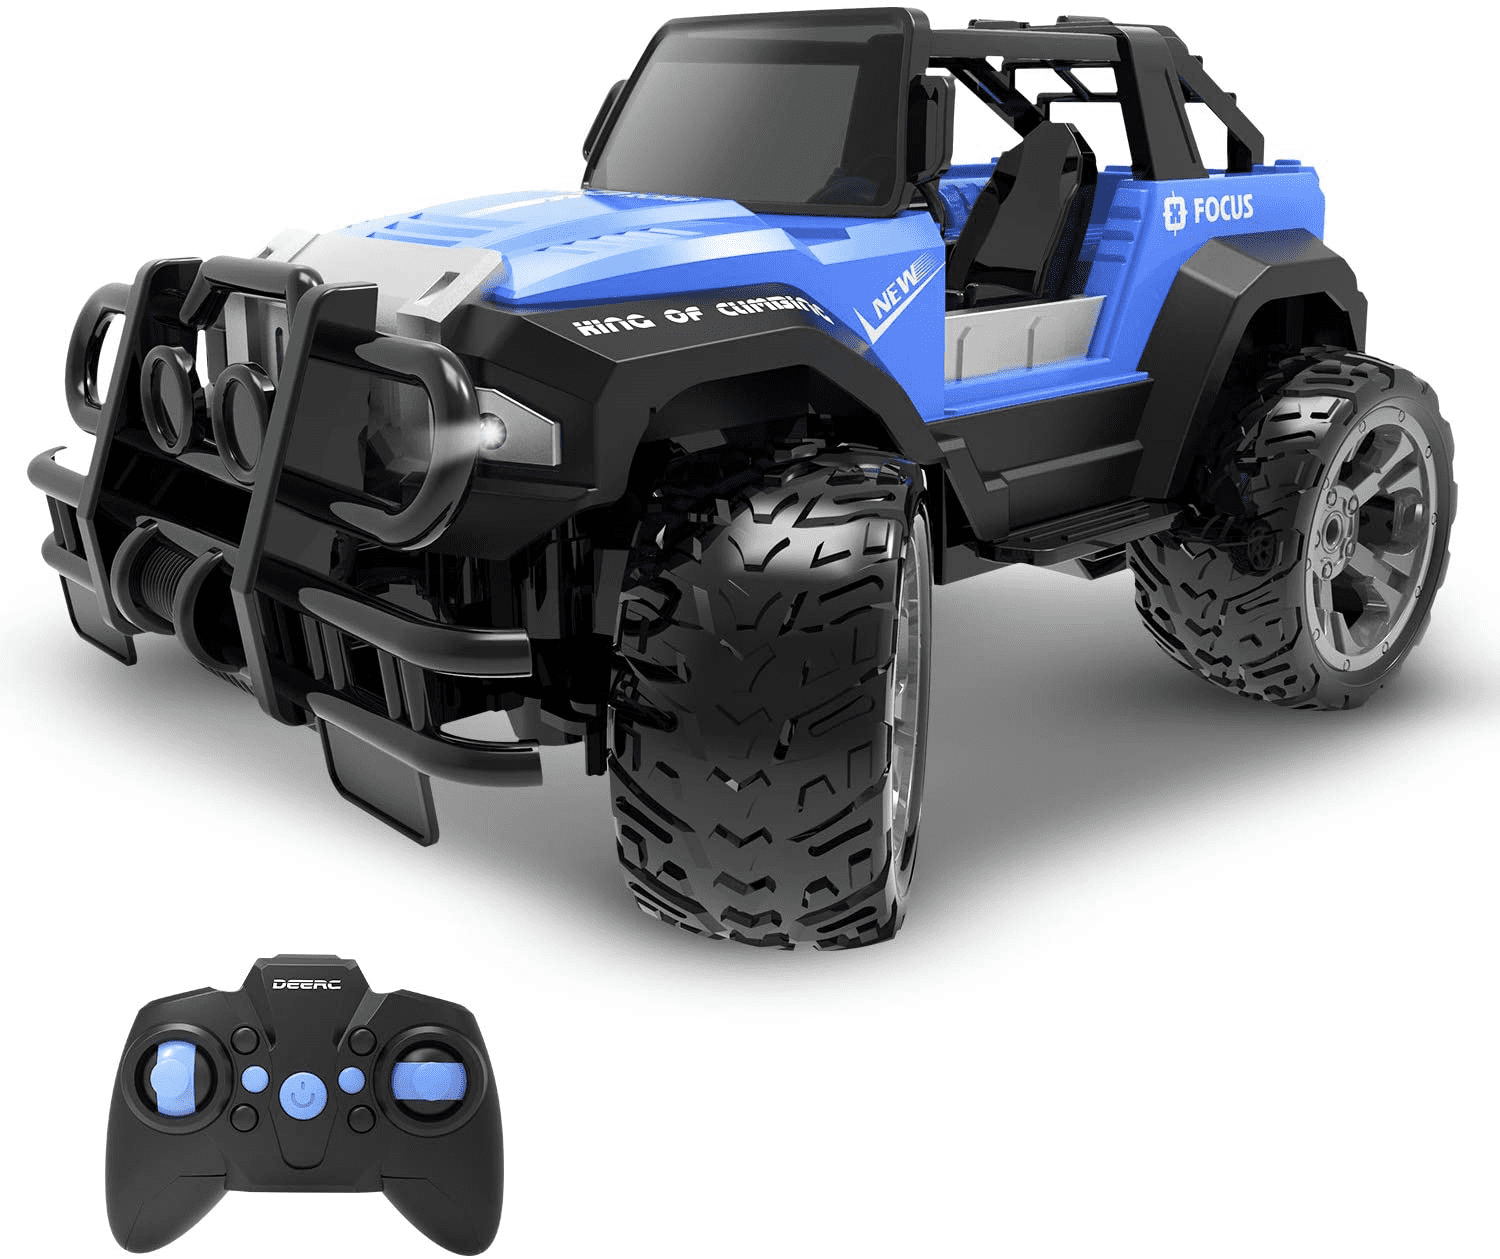 DEERC Remote Control Car RC Racing Cars,1:18 Scale 80 Min Play 2.4Ghz LED Light Auto Mode Off Road RC Trucks with Storage Case,All Terrain SUV Jeep Cars Toys Gifts for Boys Kids Girls Teens,Blue